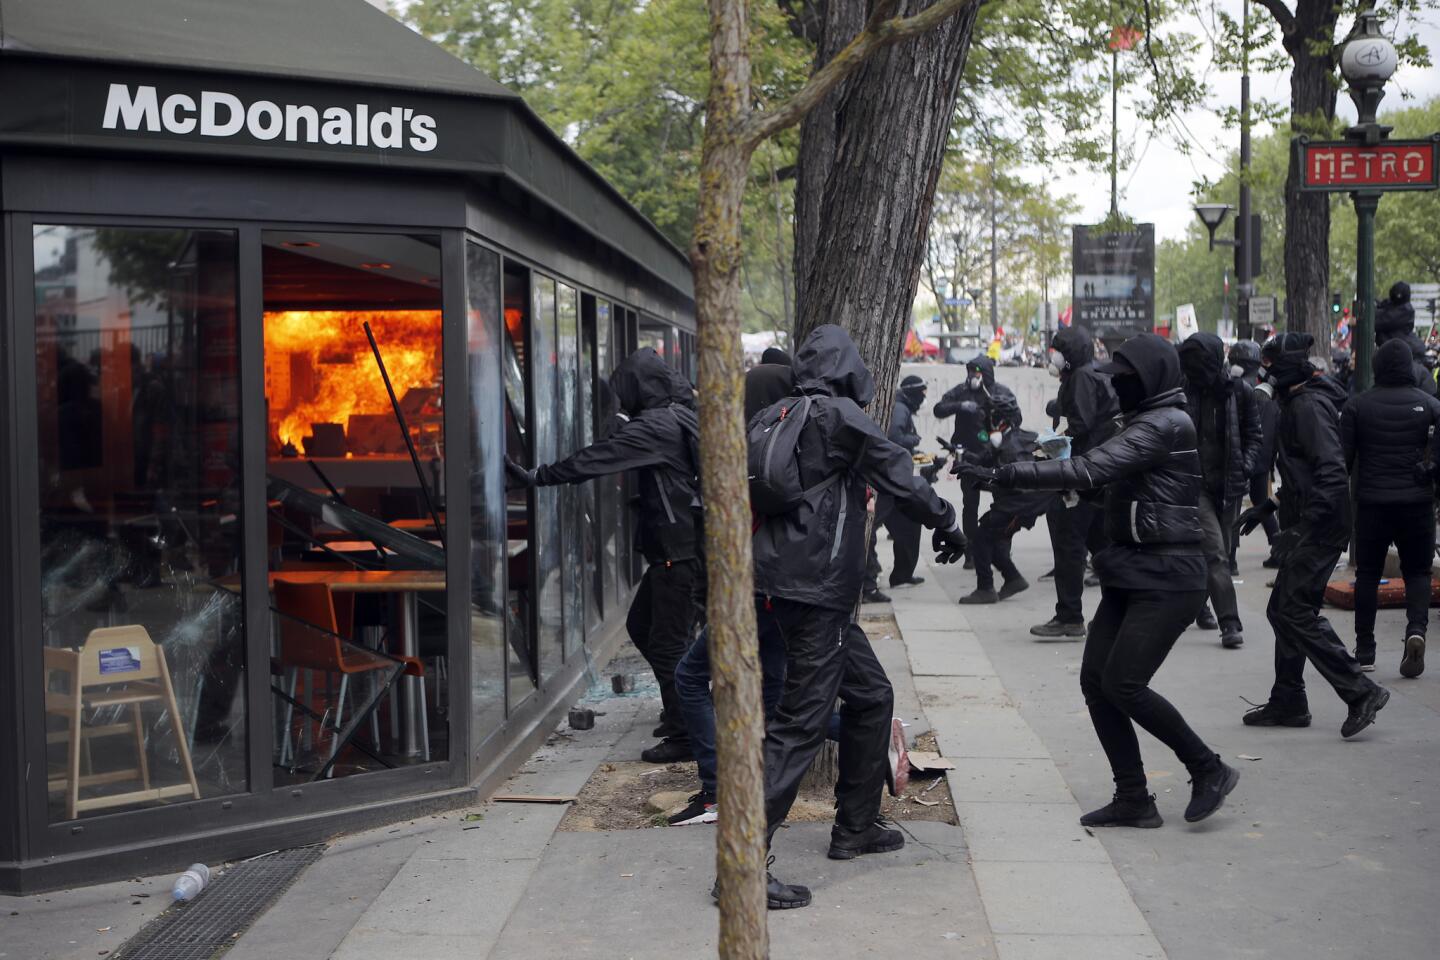 A McDonald's restaurant is hit with petrol bombs thrown by activists Tuesday during the annual May Day rally in the center of Paris.